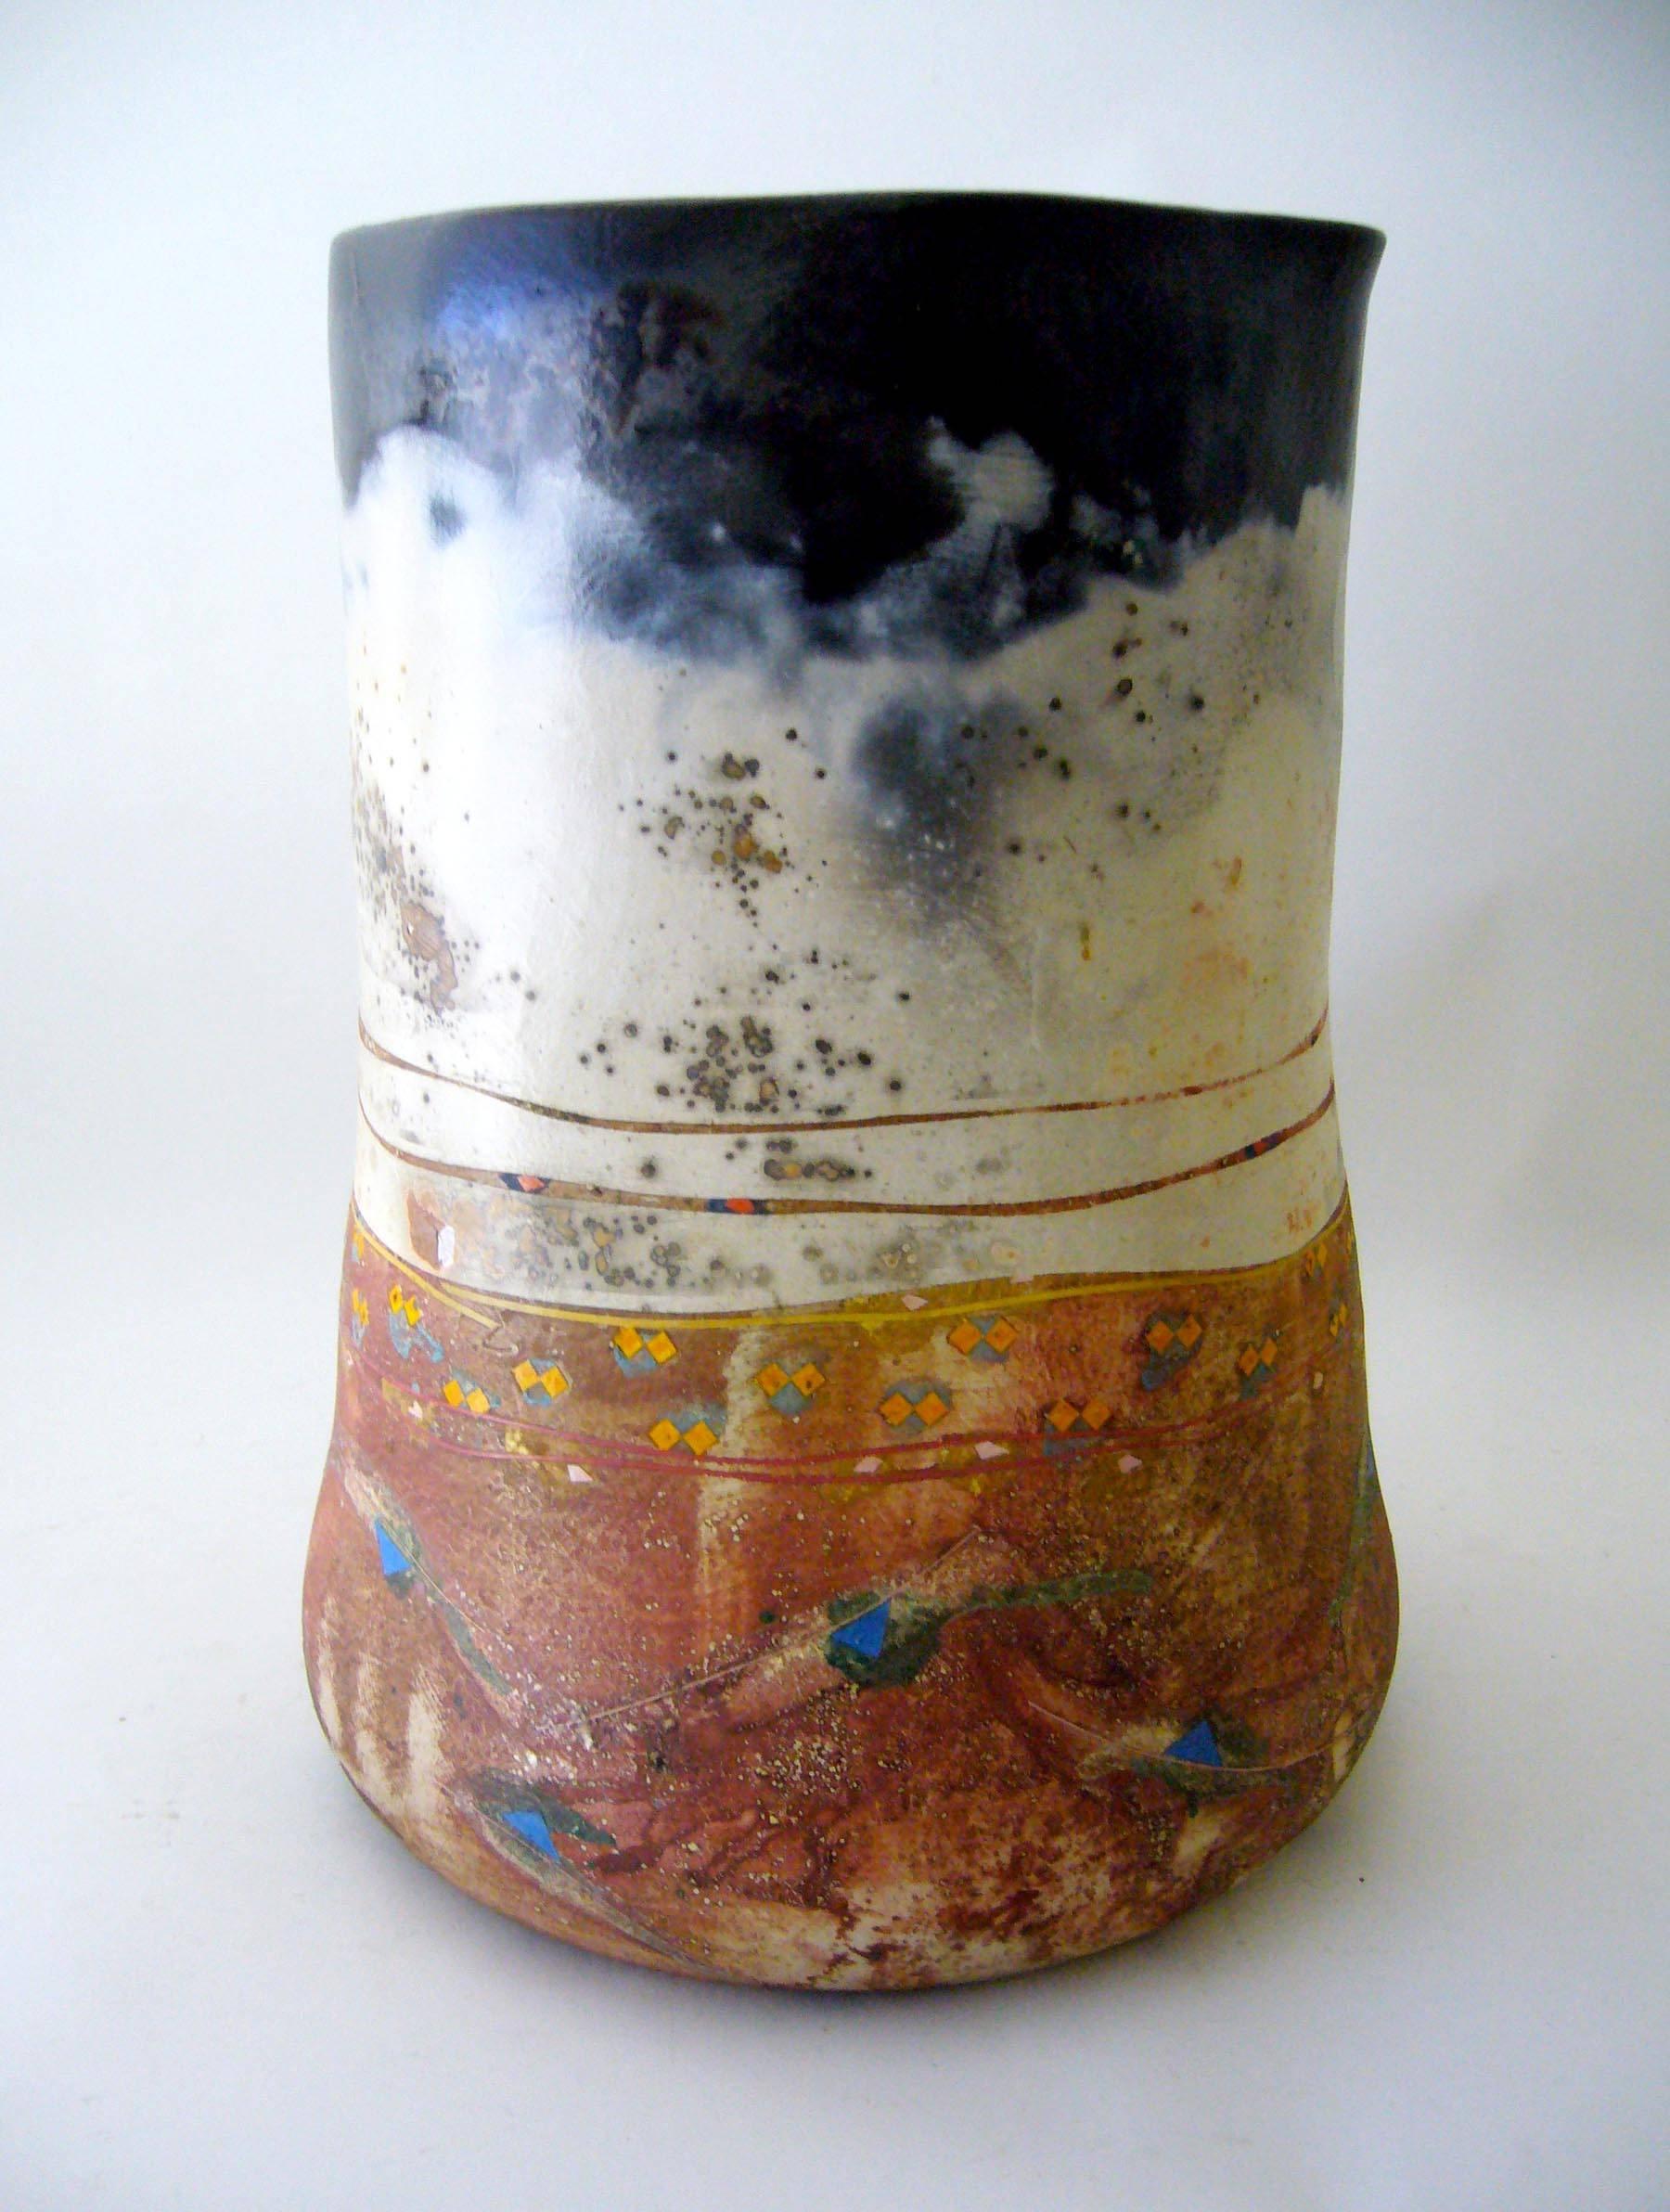 Large earthenware ceramic open vessel created by Bennett Bean of Blairstown, New Jersey. Piece has a wonderful finish which includes hand painted areas along with smokey, black areas created by the pit firing. A natural crack, occurring in the